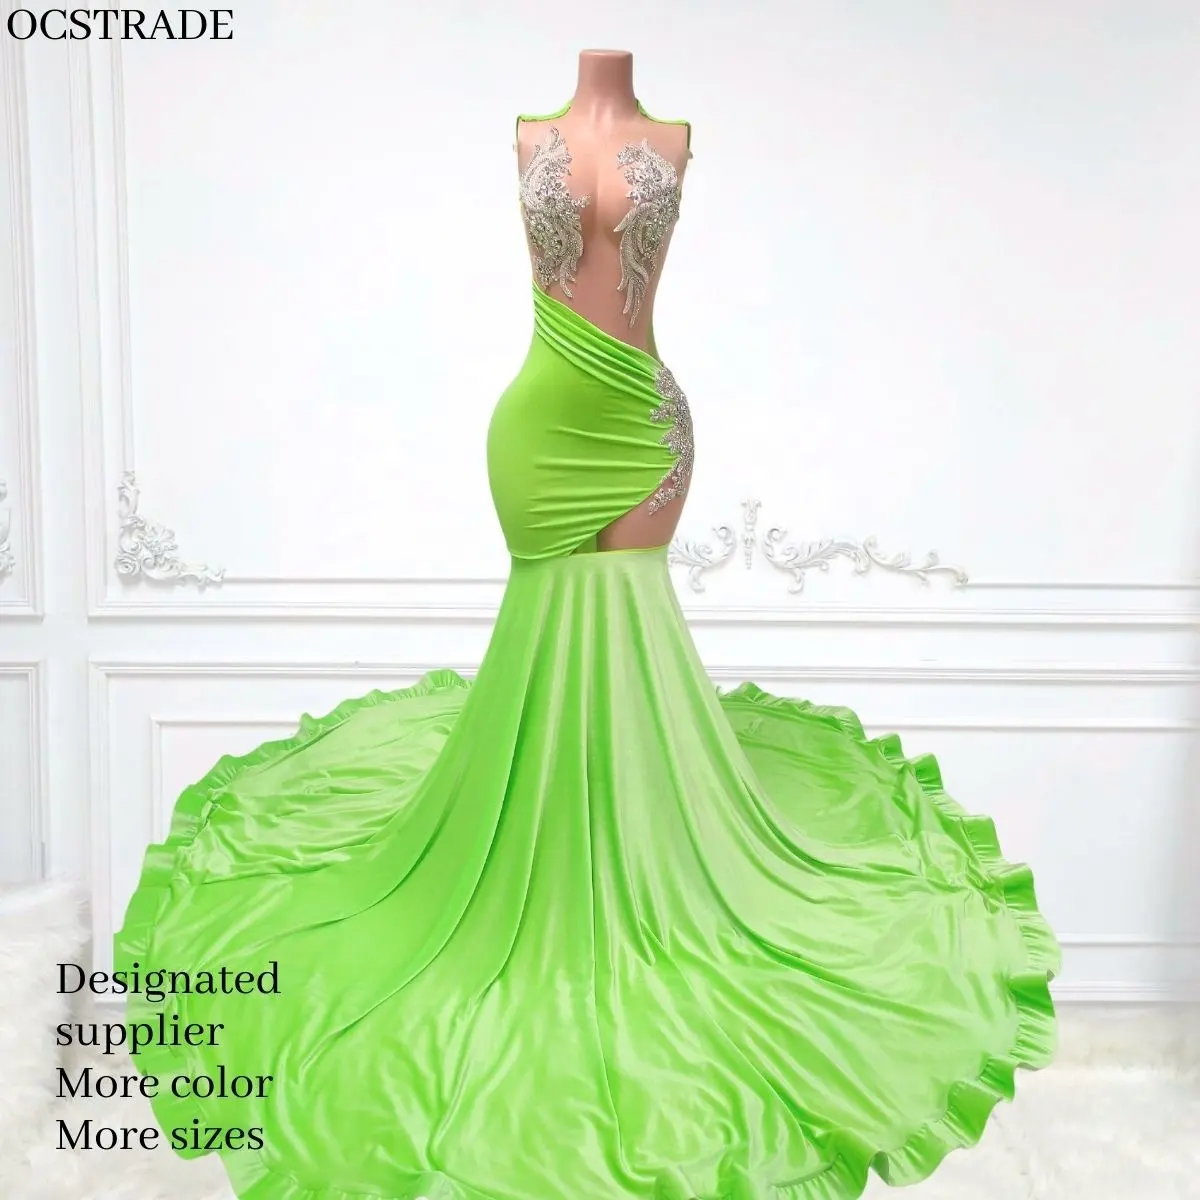 Ocstrade Sparkly Rhinestone Elegant Prom Dress Sexy Mesh Corsets Sequin Long Trumpet Ball Gown Green Evening Dress